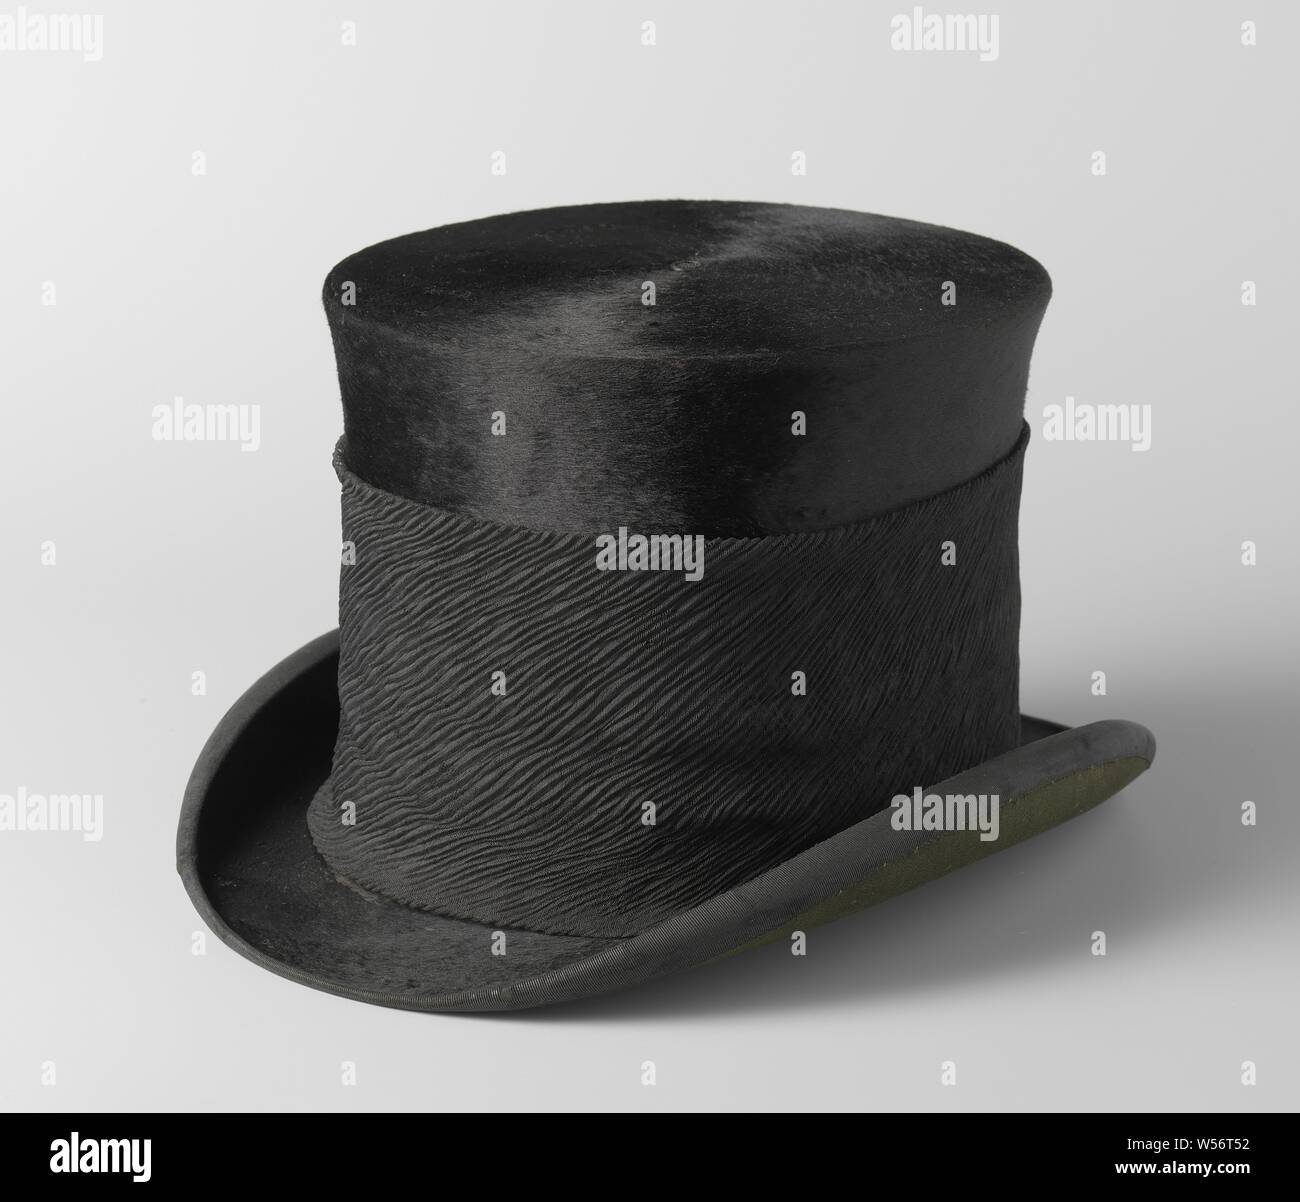 Top hat from S.J.P. Kruger, Black top hat with wide ribbed black